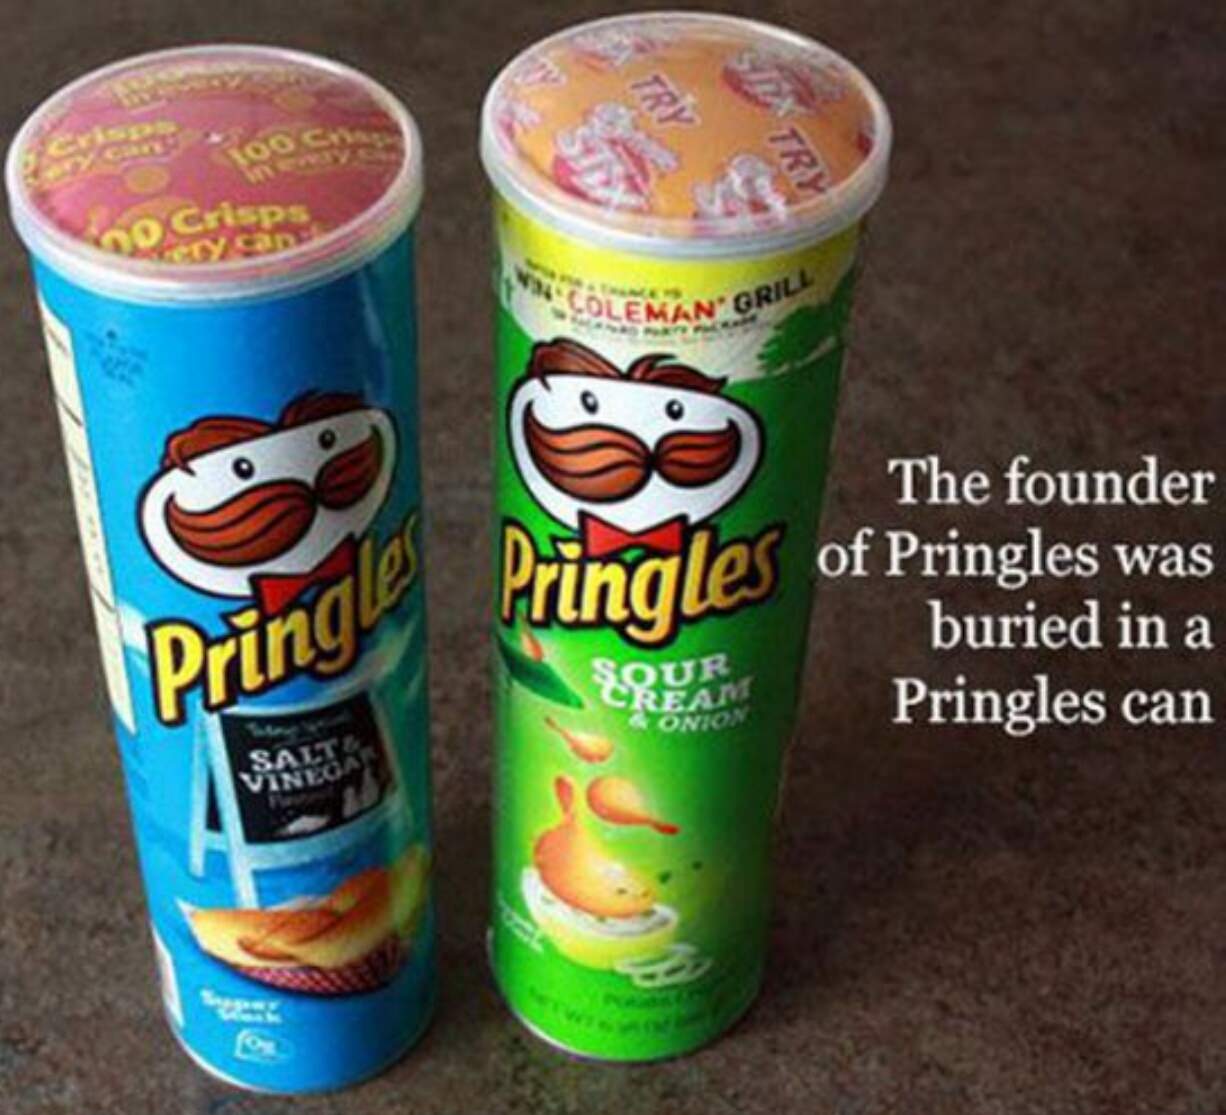 random facts of the day - The founder Pringles of Pringles was Pring buried in a Pringles can Onio